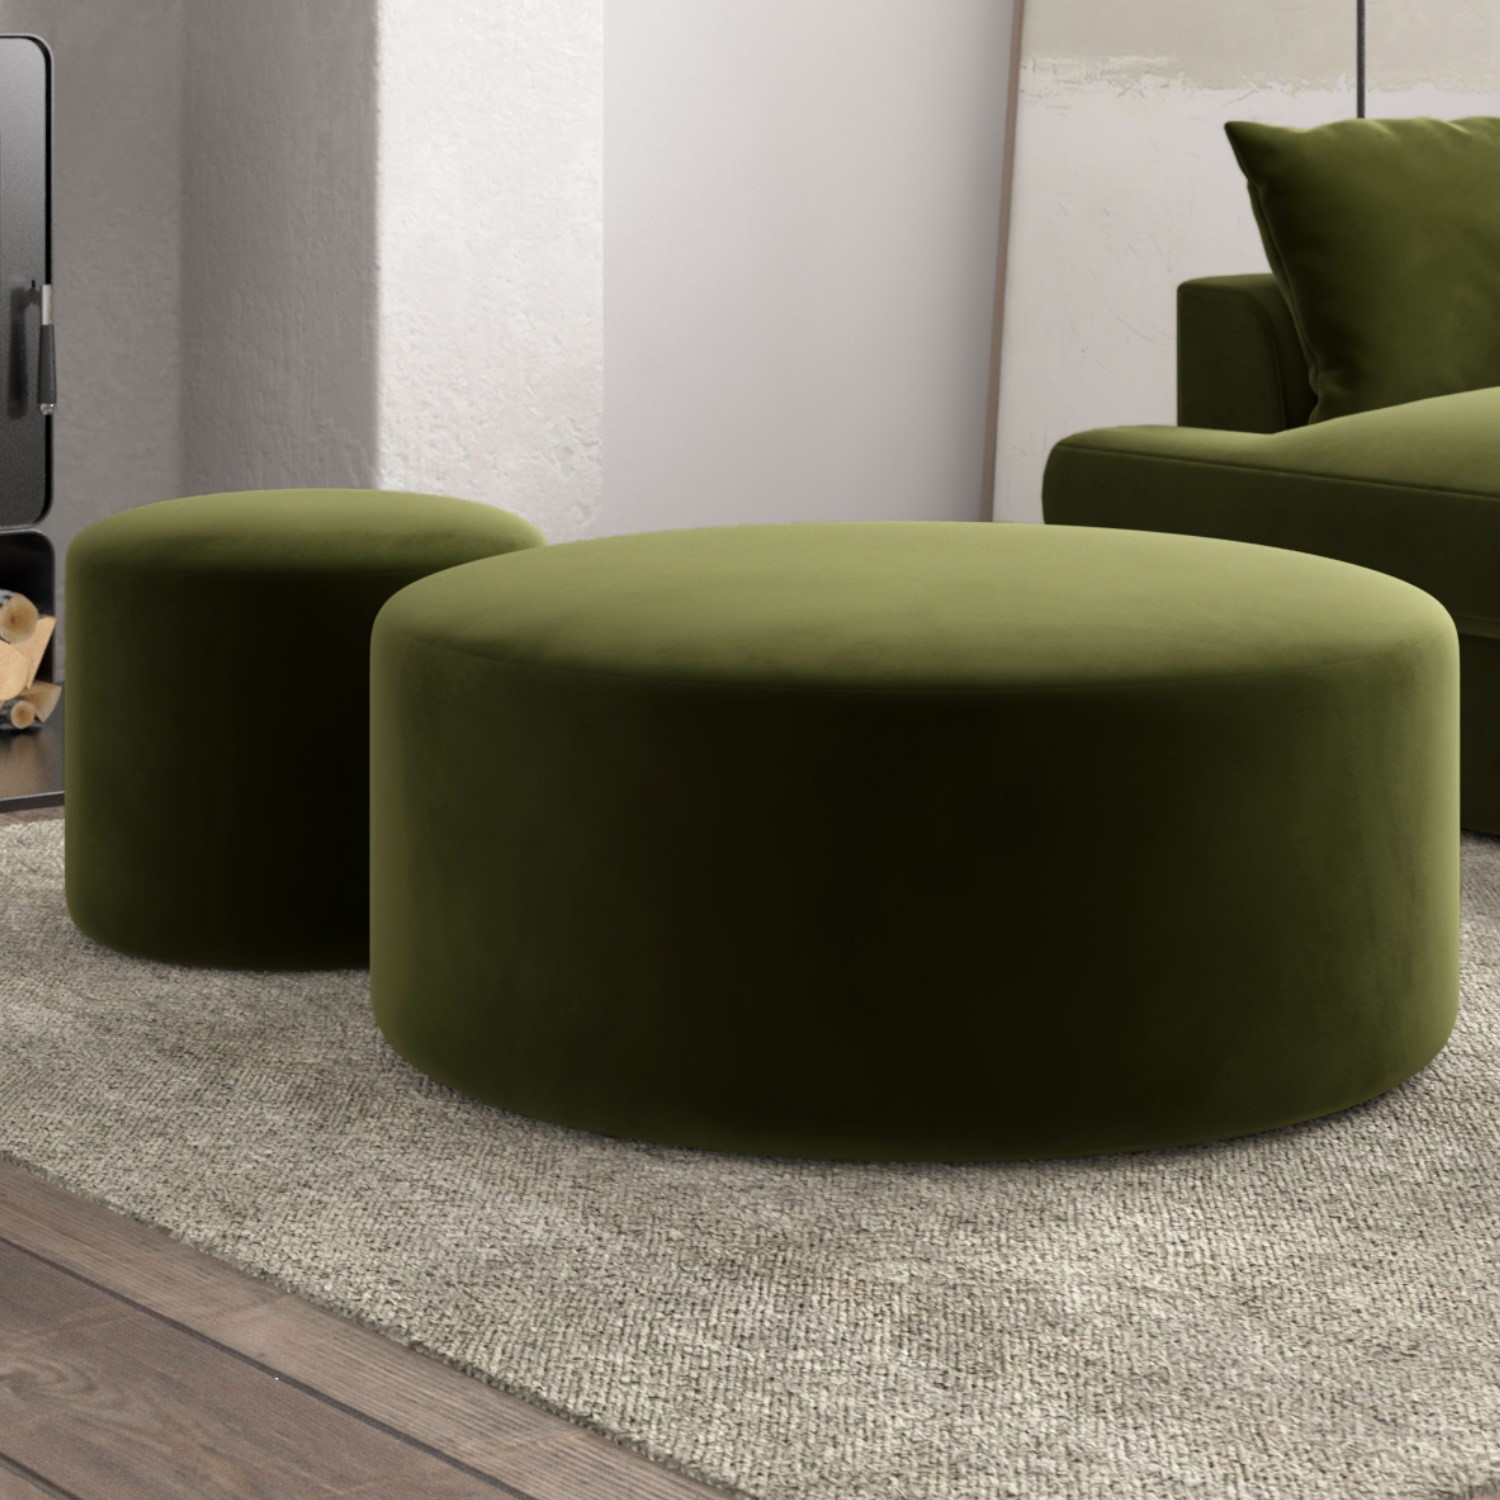 Read more about Set of 2 olive green velvet large round footstools dahlia